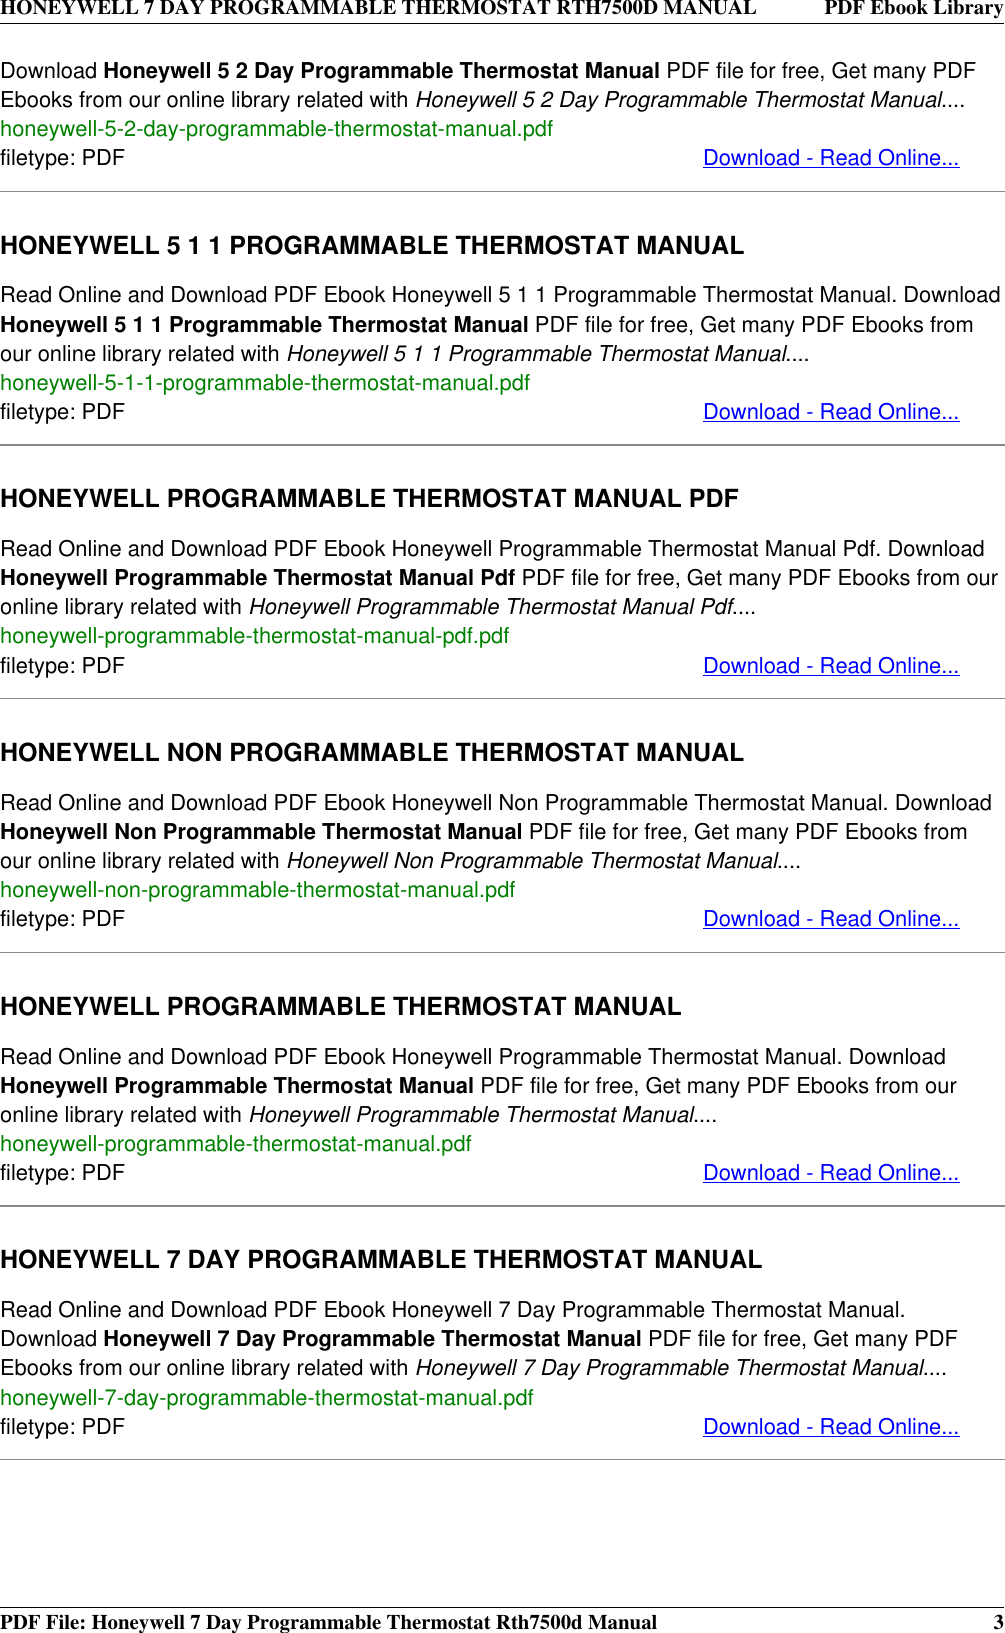 Page 3 of 4 - Honeywell Honeywell-Honeywell-Thermostat-Rth7500D-Users-Manual- 7 DAY PROGRAMMABLE THERMOSTAT RTH7500D MANUAL  Honeywell-honeywell-thermostat-rth7500d-users-manual